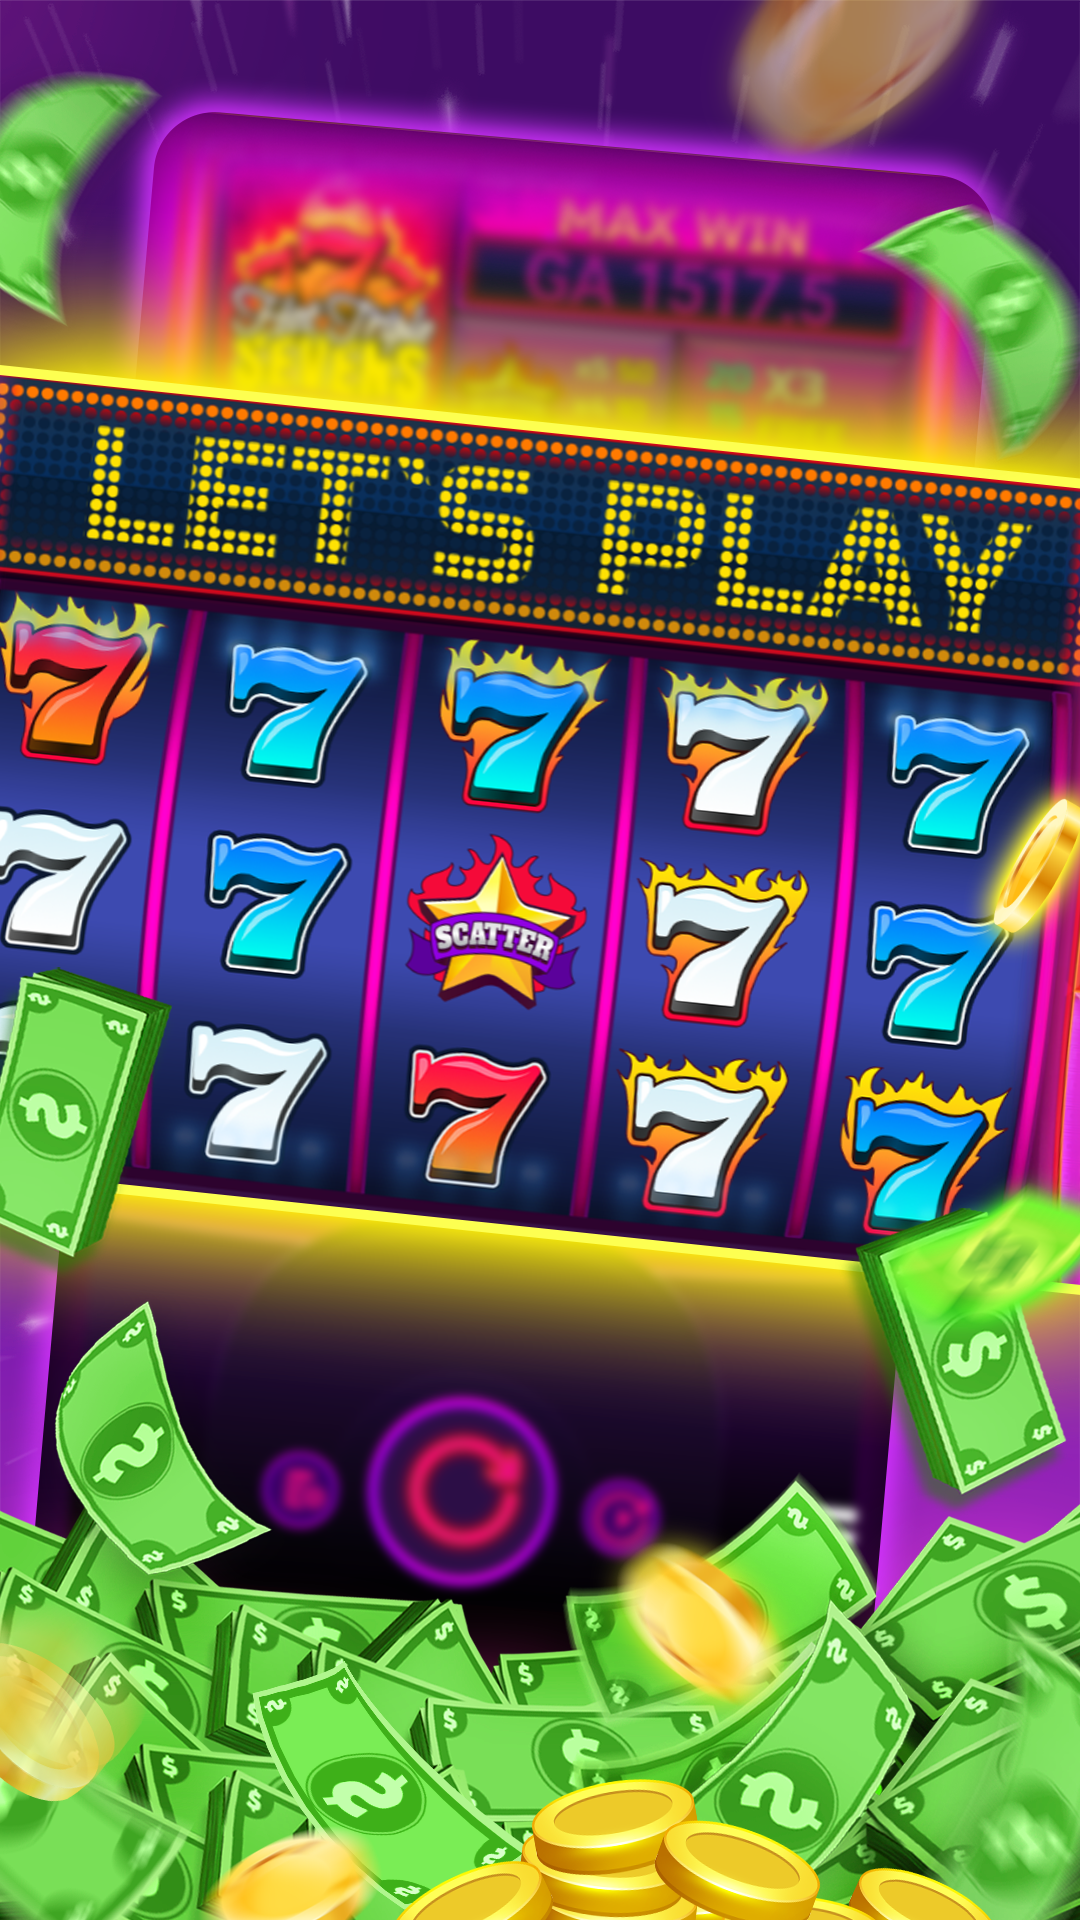 Play YeaMaster - Slots Online